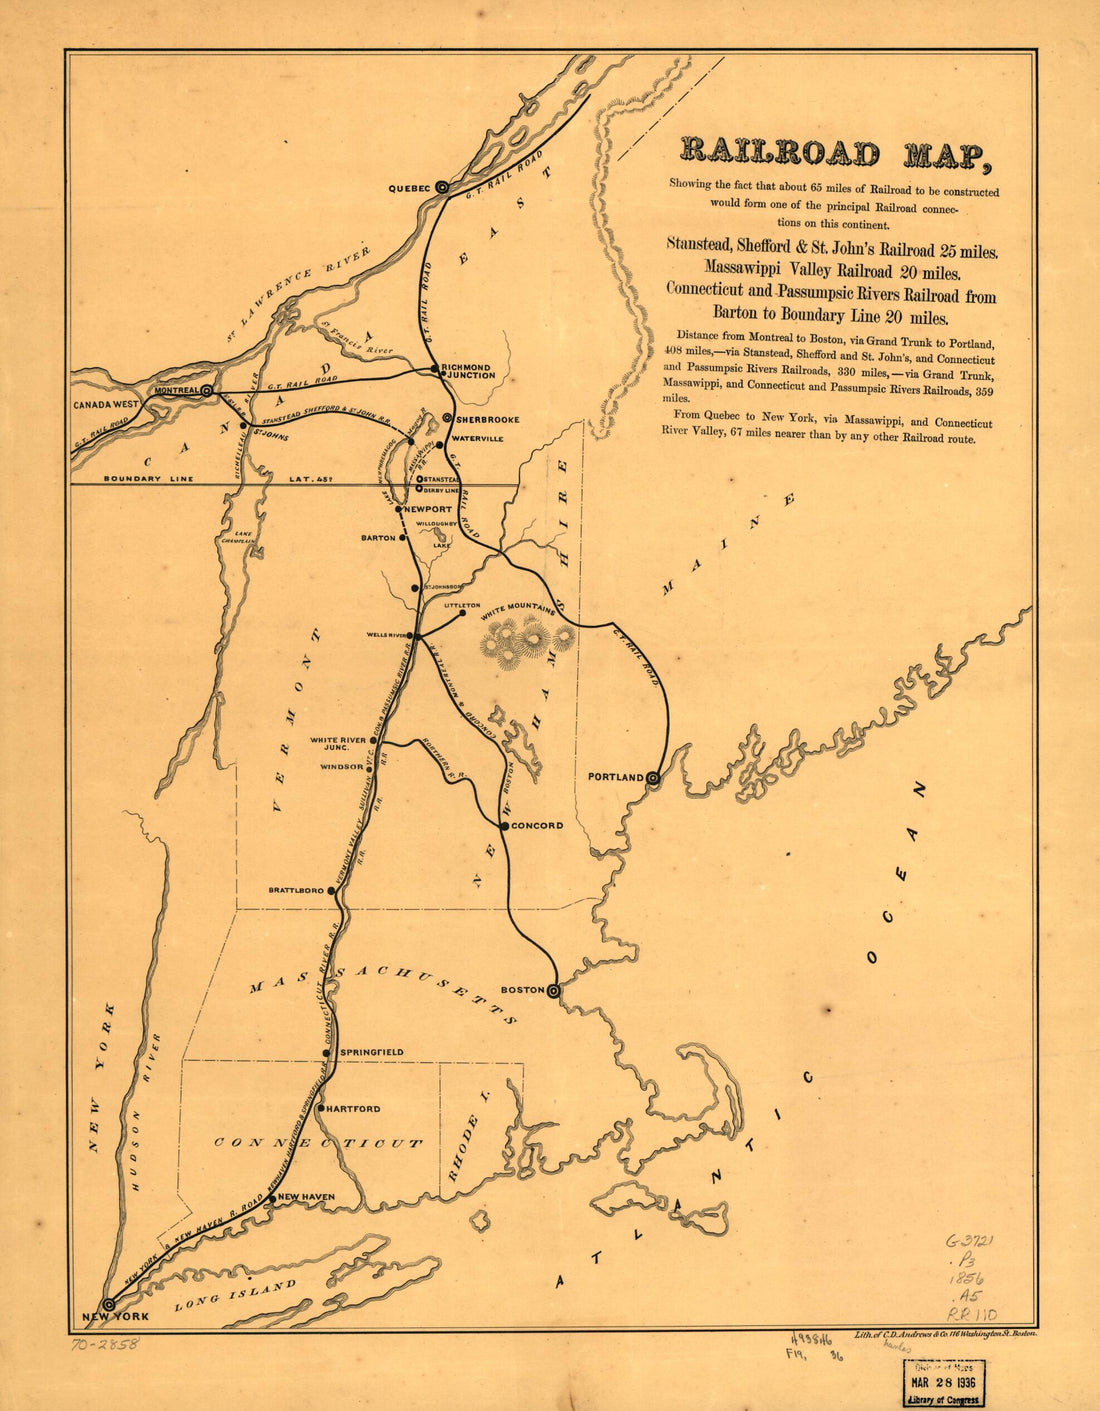 This old map of Railroad Map, Showing the Fact That About 65 Miles of Railroad to Be Constructed Would Form One of the Principal Railroad Connections On This Continent from 1856 was created by  C. D. Andrews &amp; Co in 1856